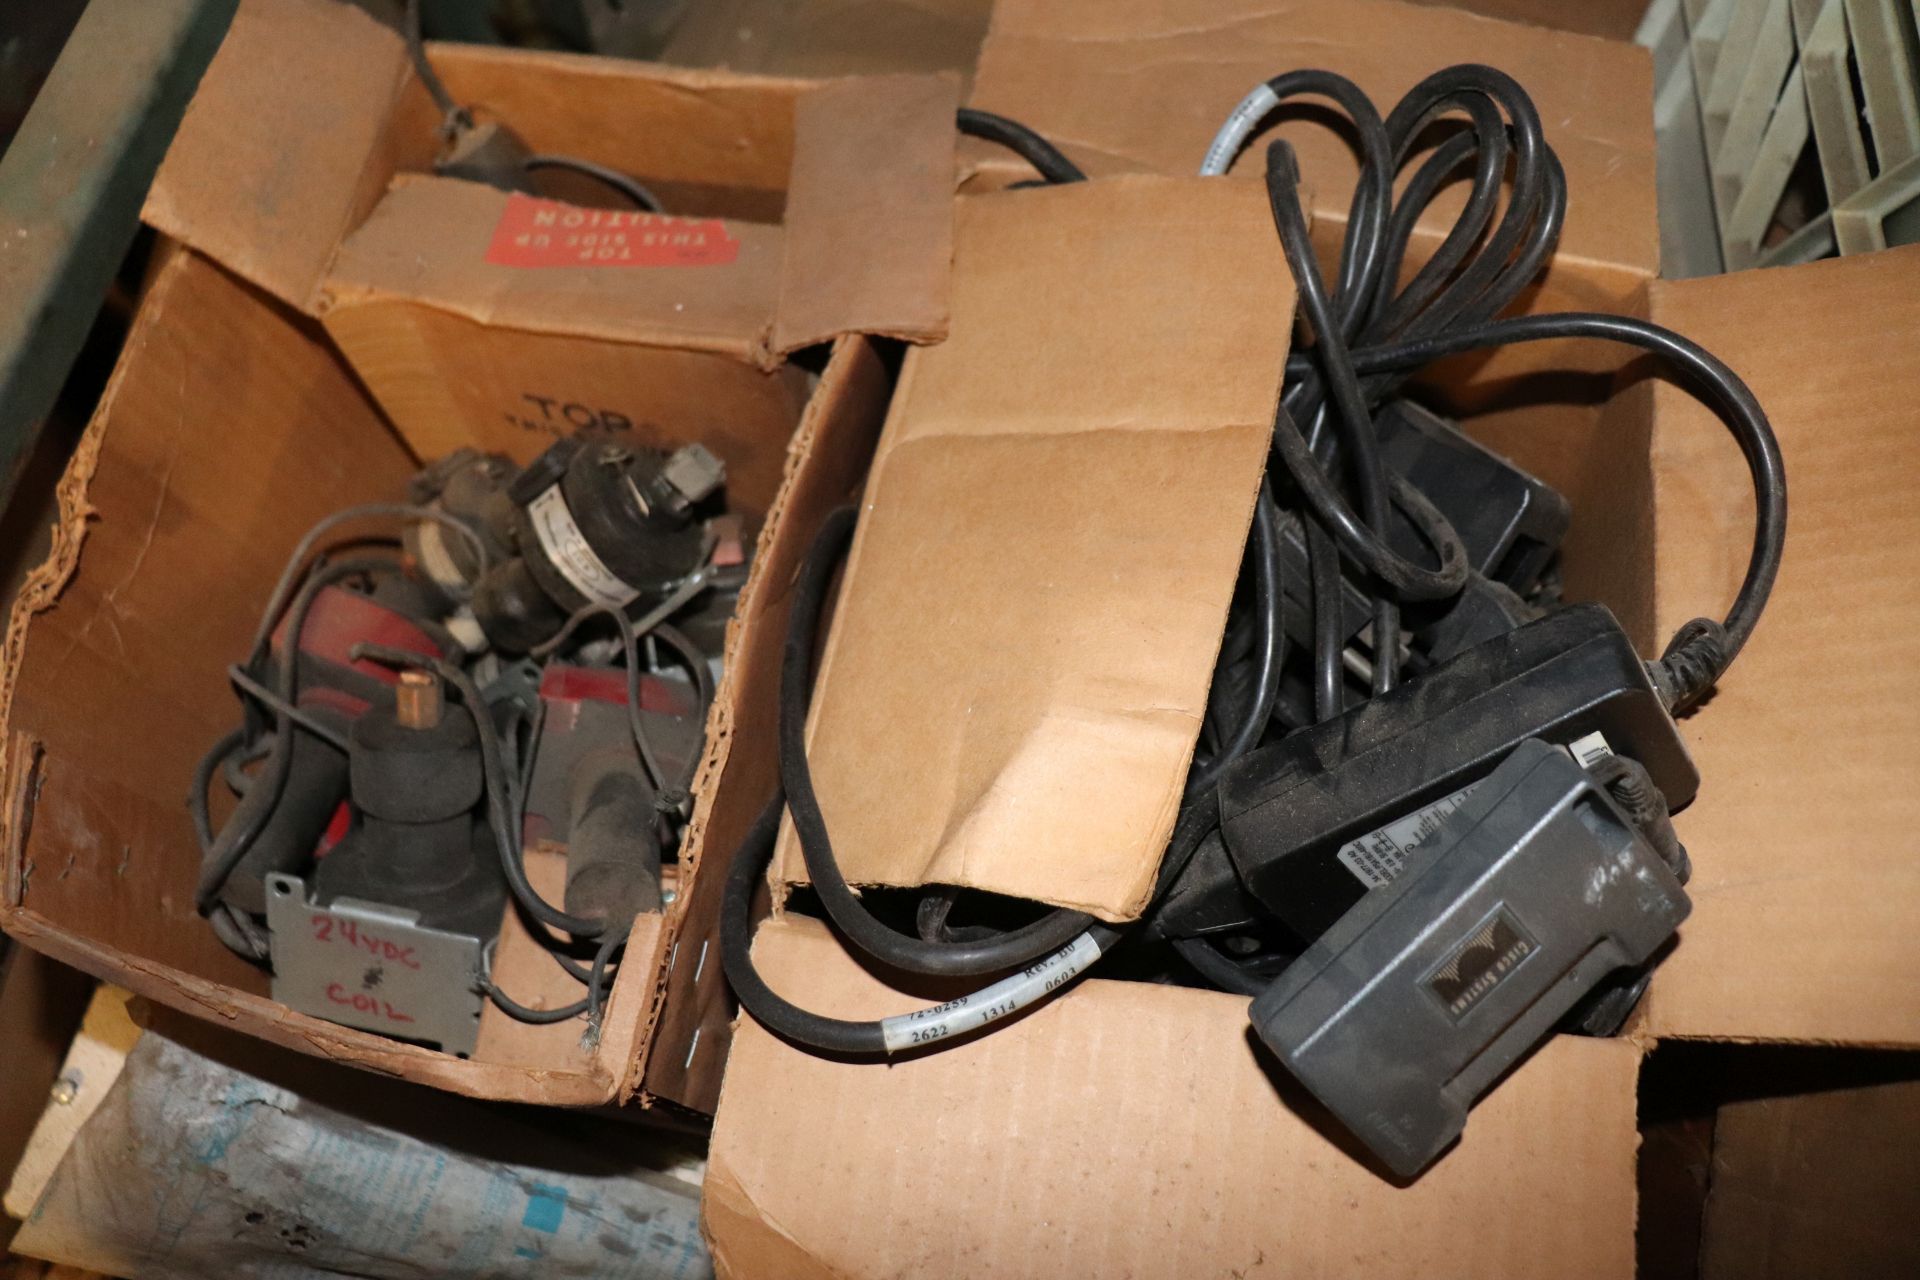 Pallet of small light bulbs, electrical components, circuit breakers, power bricks, and electric mot - Image 6 of 11